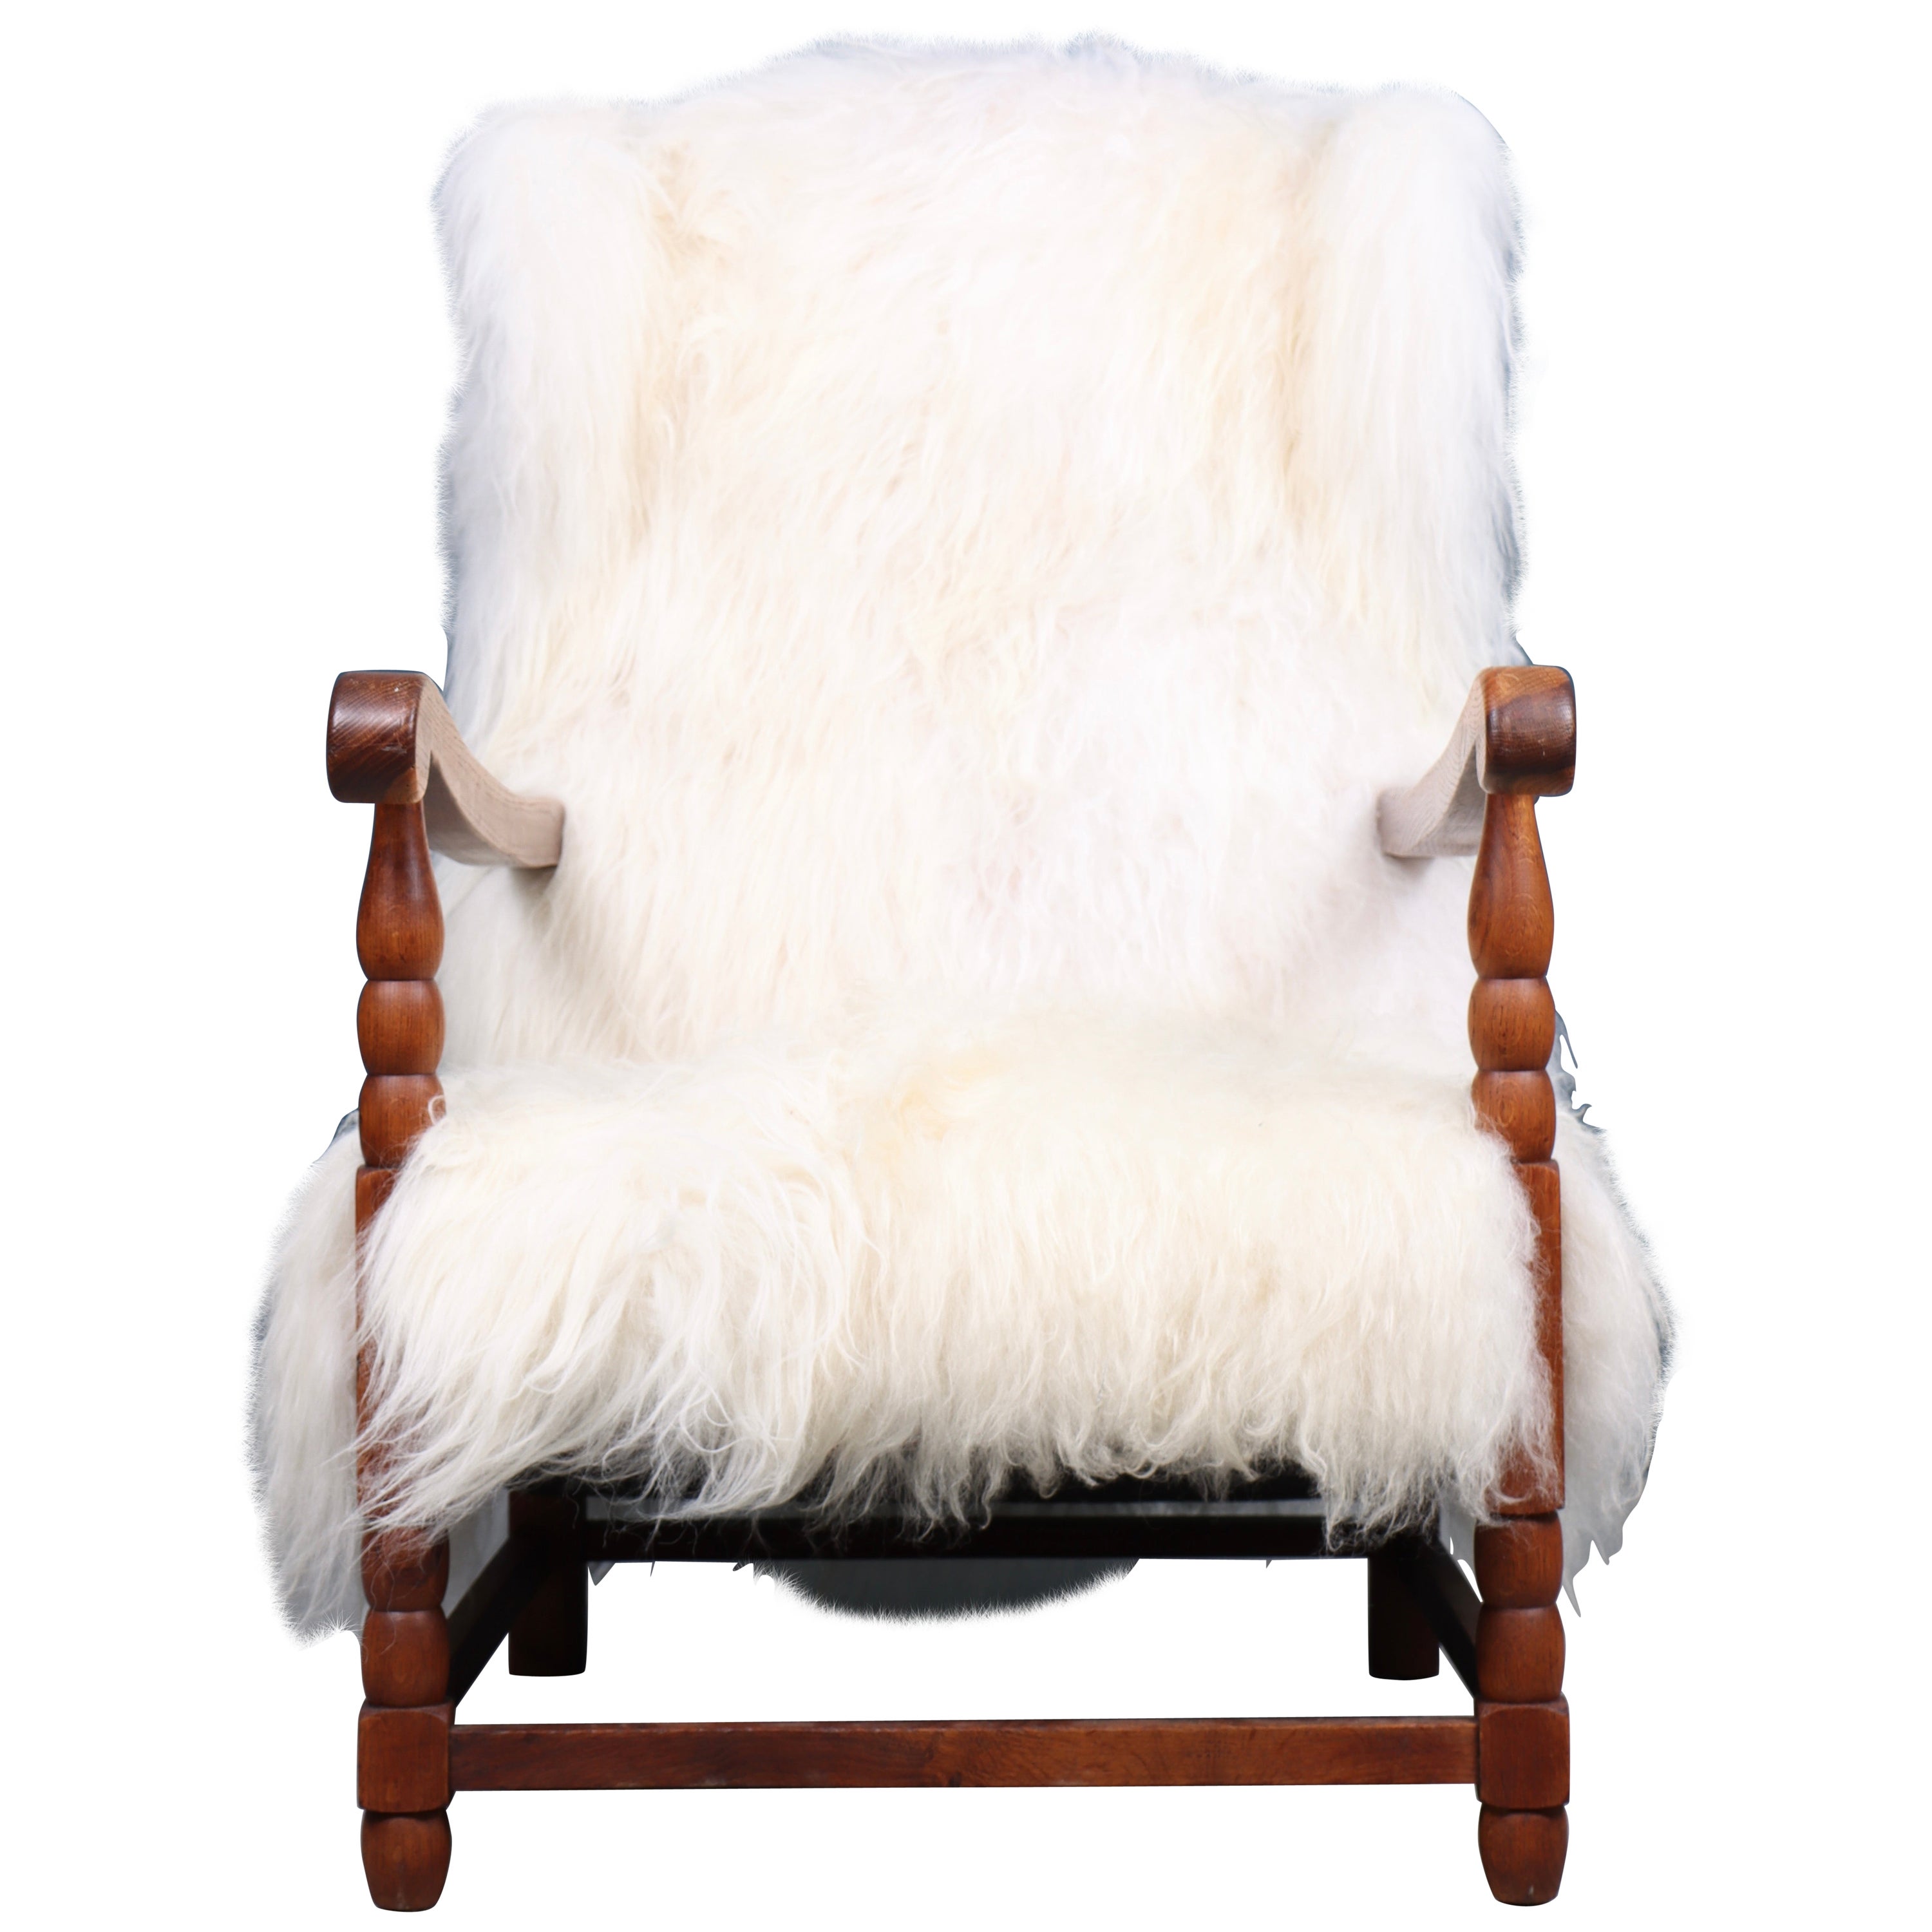 Danish Wingback Chair with Sheepskin, 1940s For Sale